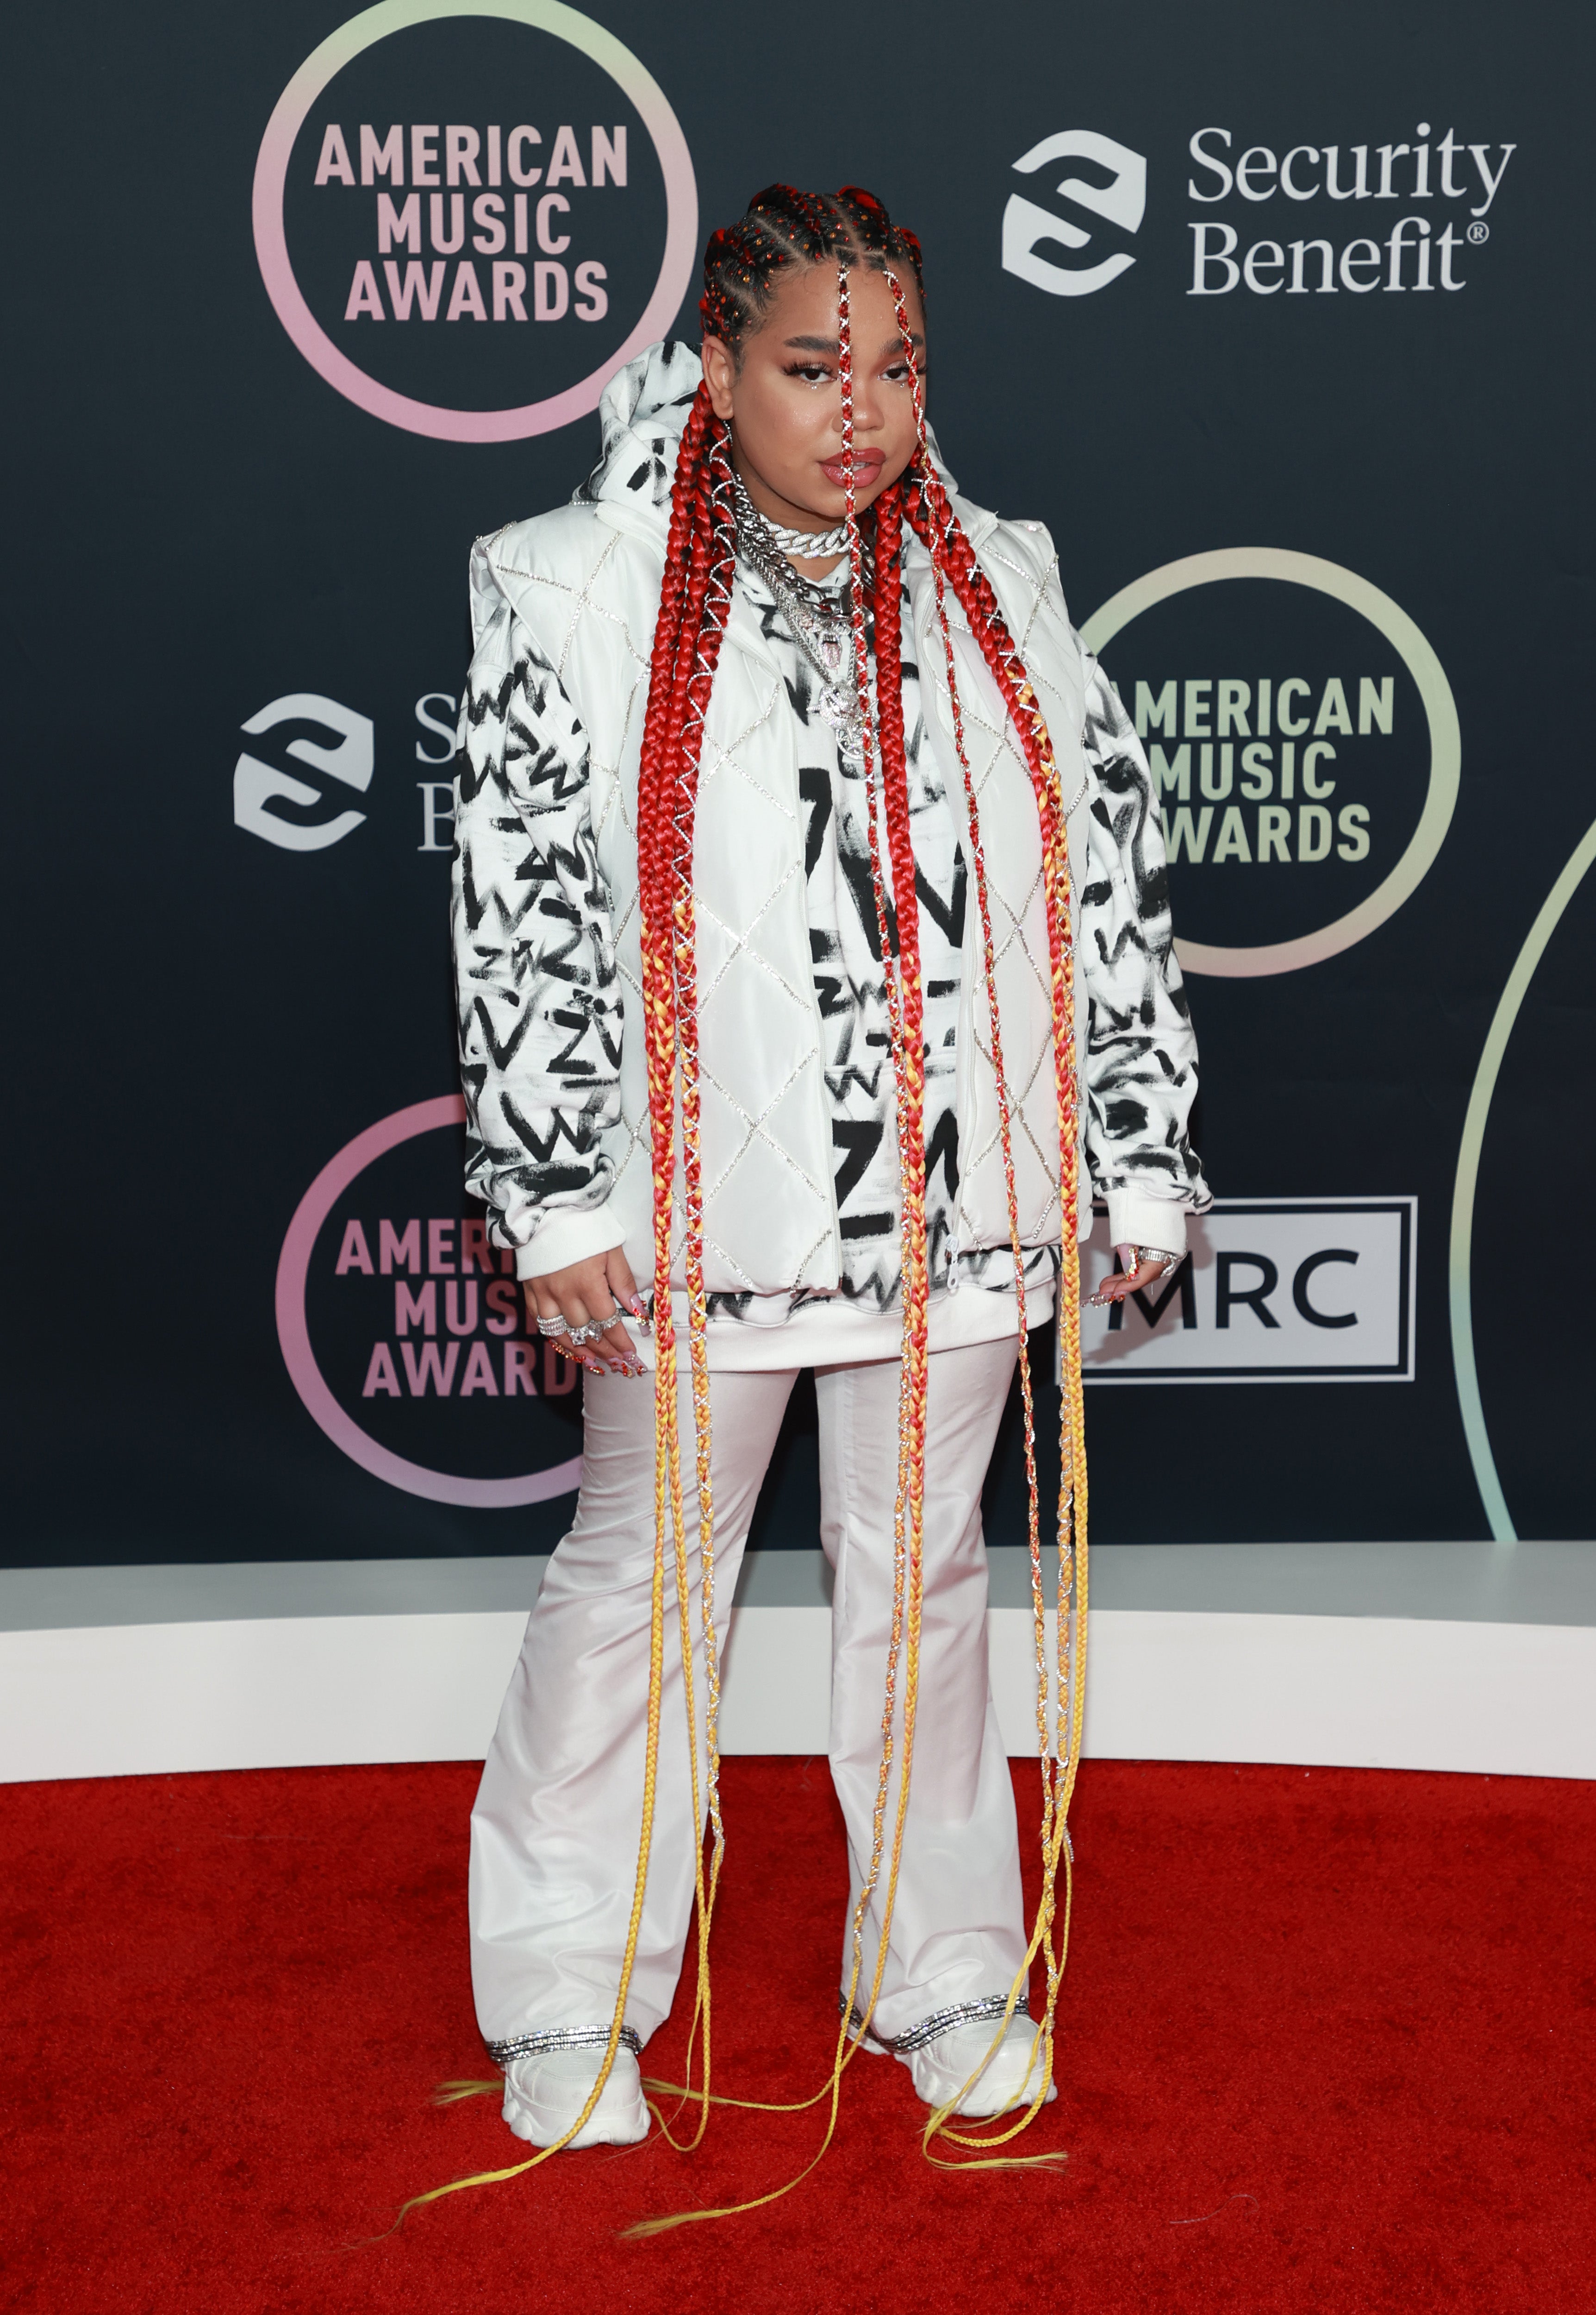 Zoe Wees attends the 2021 American Music Awards